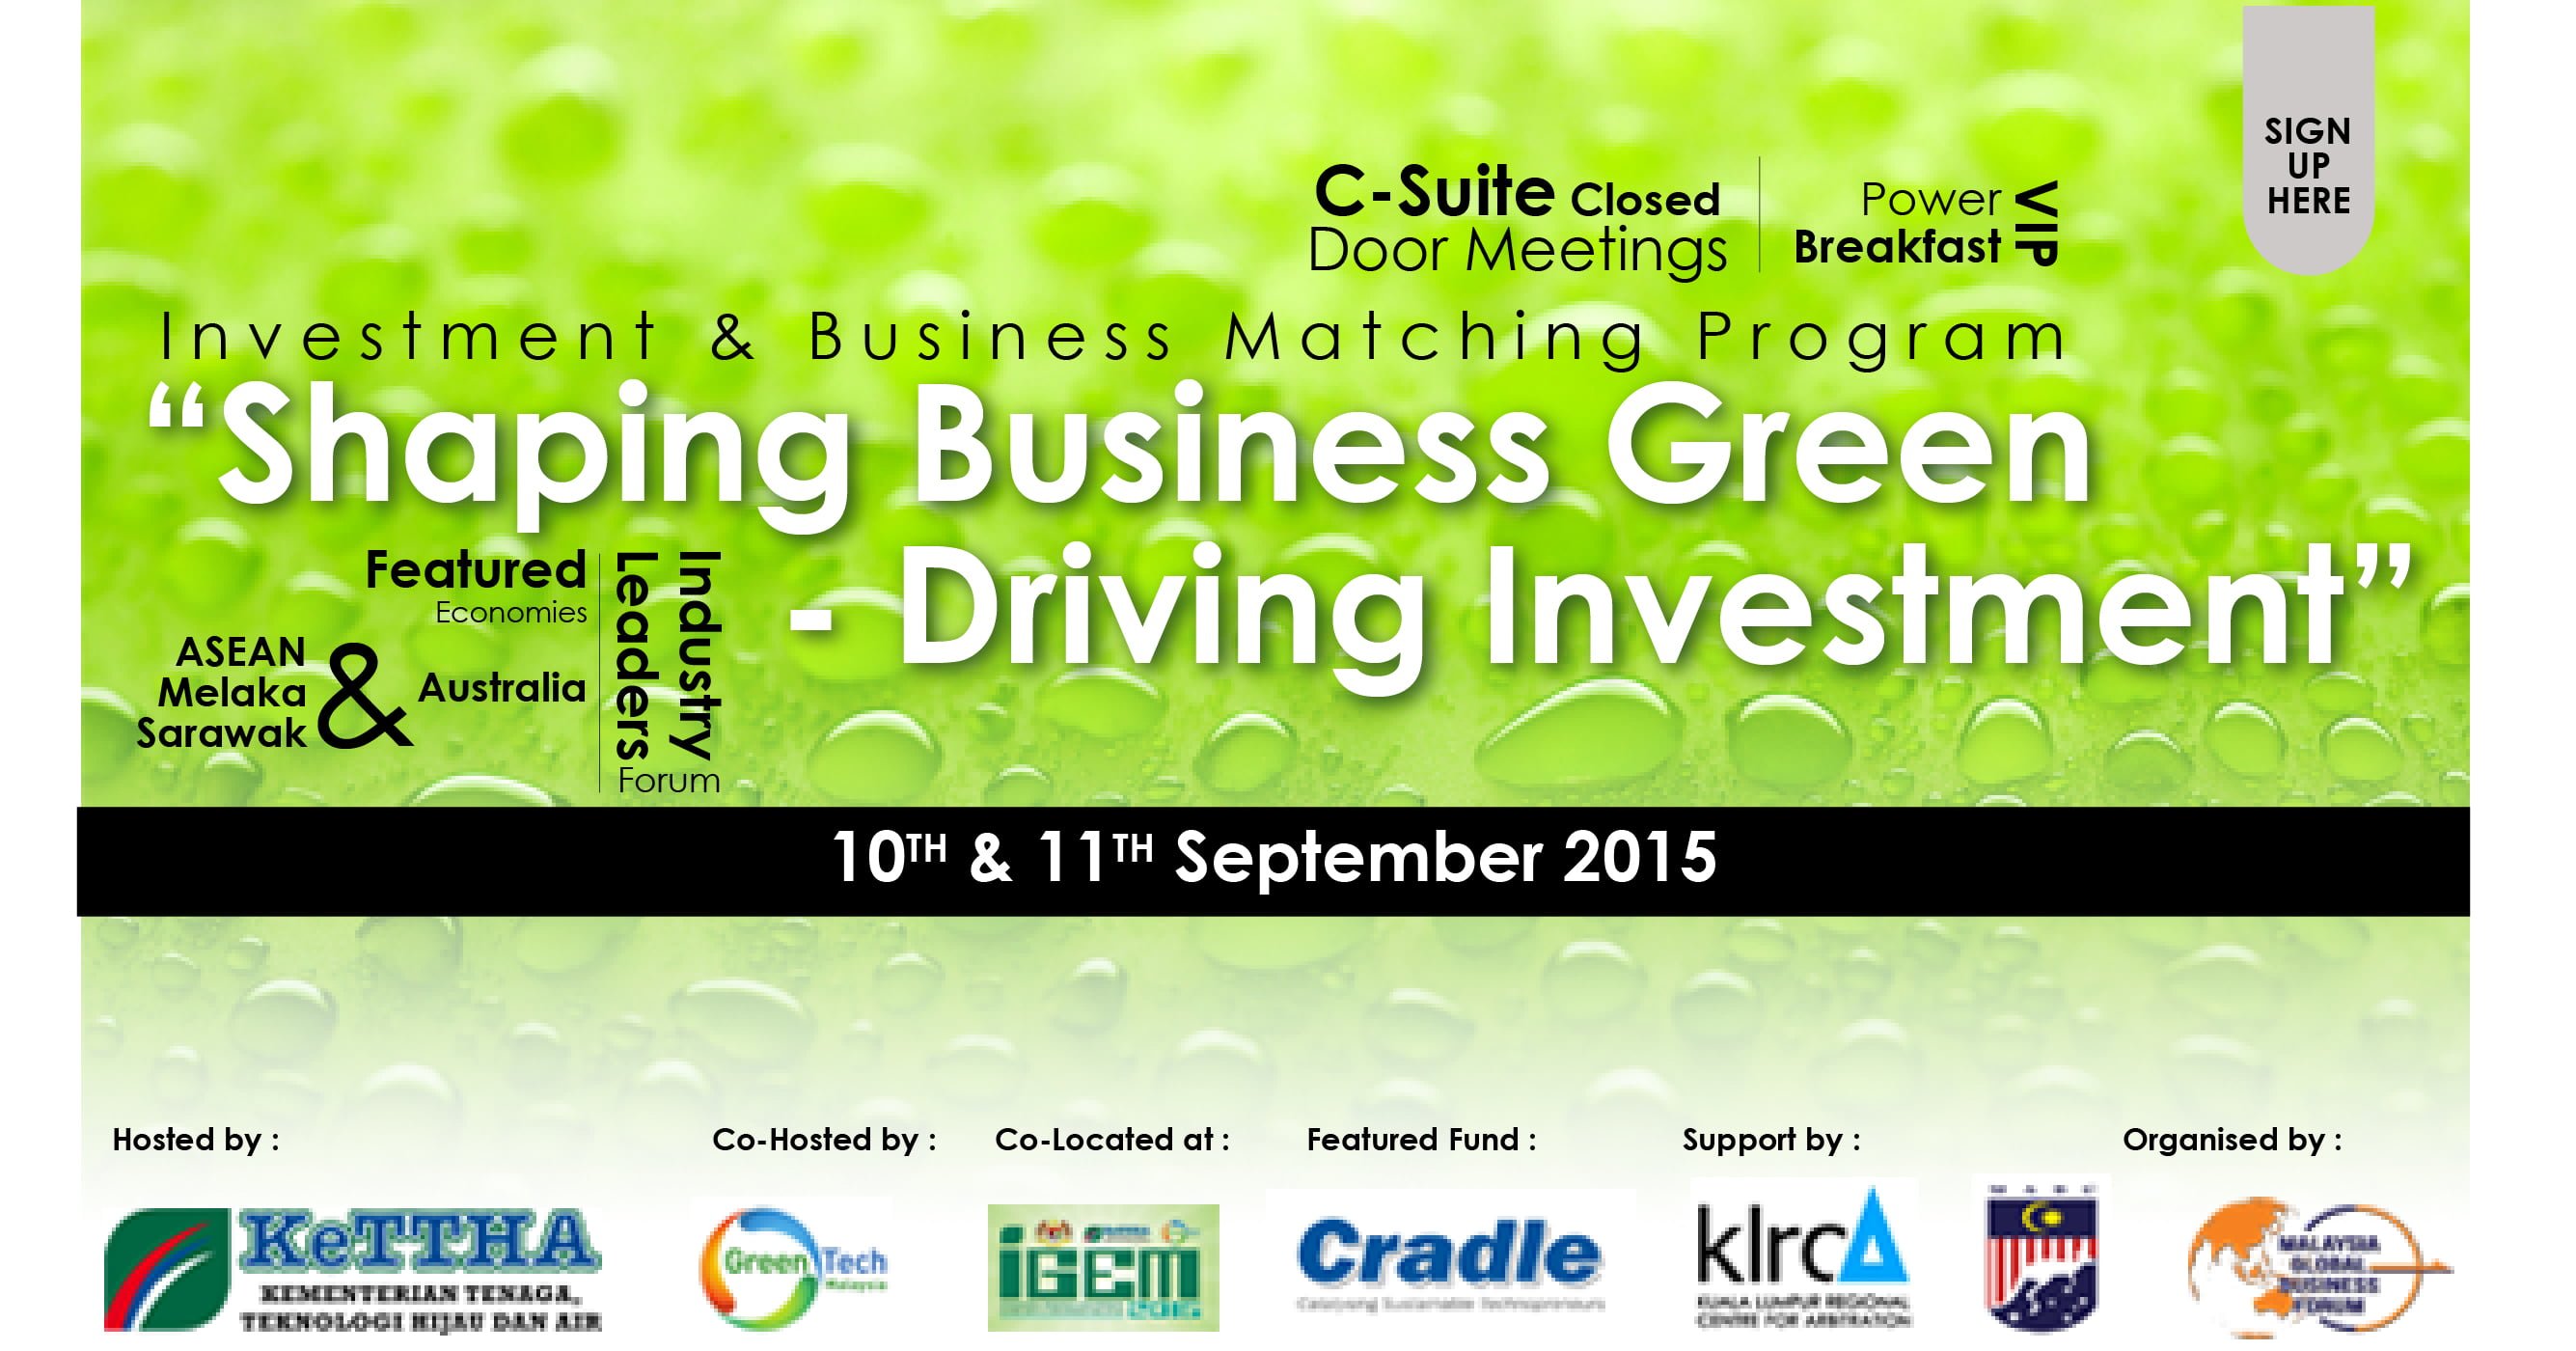 Malaysia Global Business Forum Green Tech Business & Investment Matching